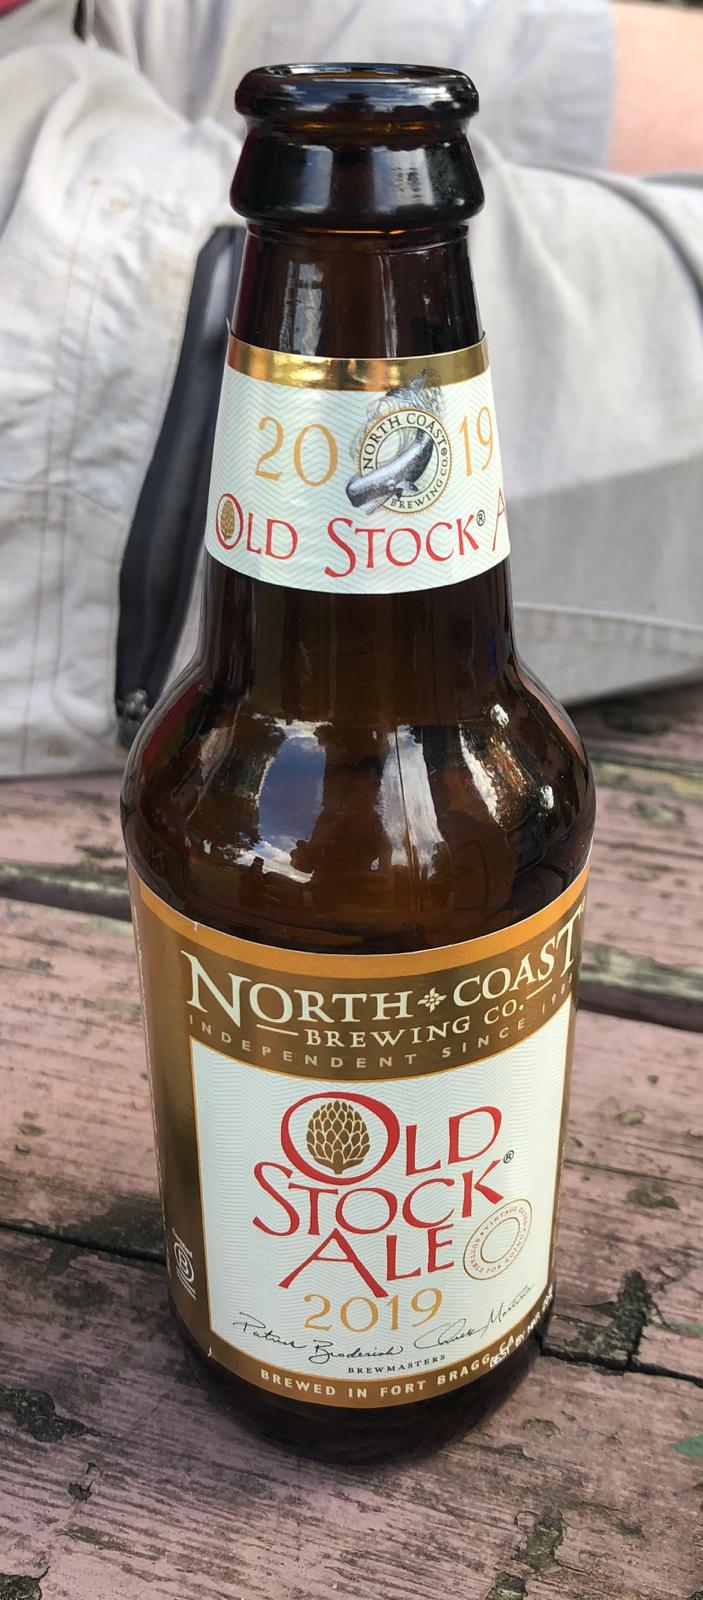 Old Stock Ale (2019)